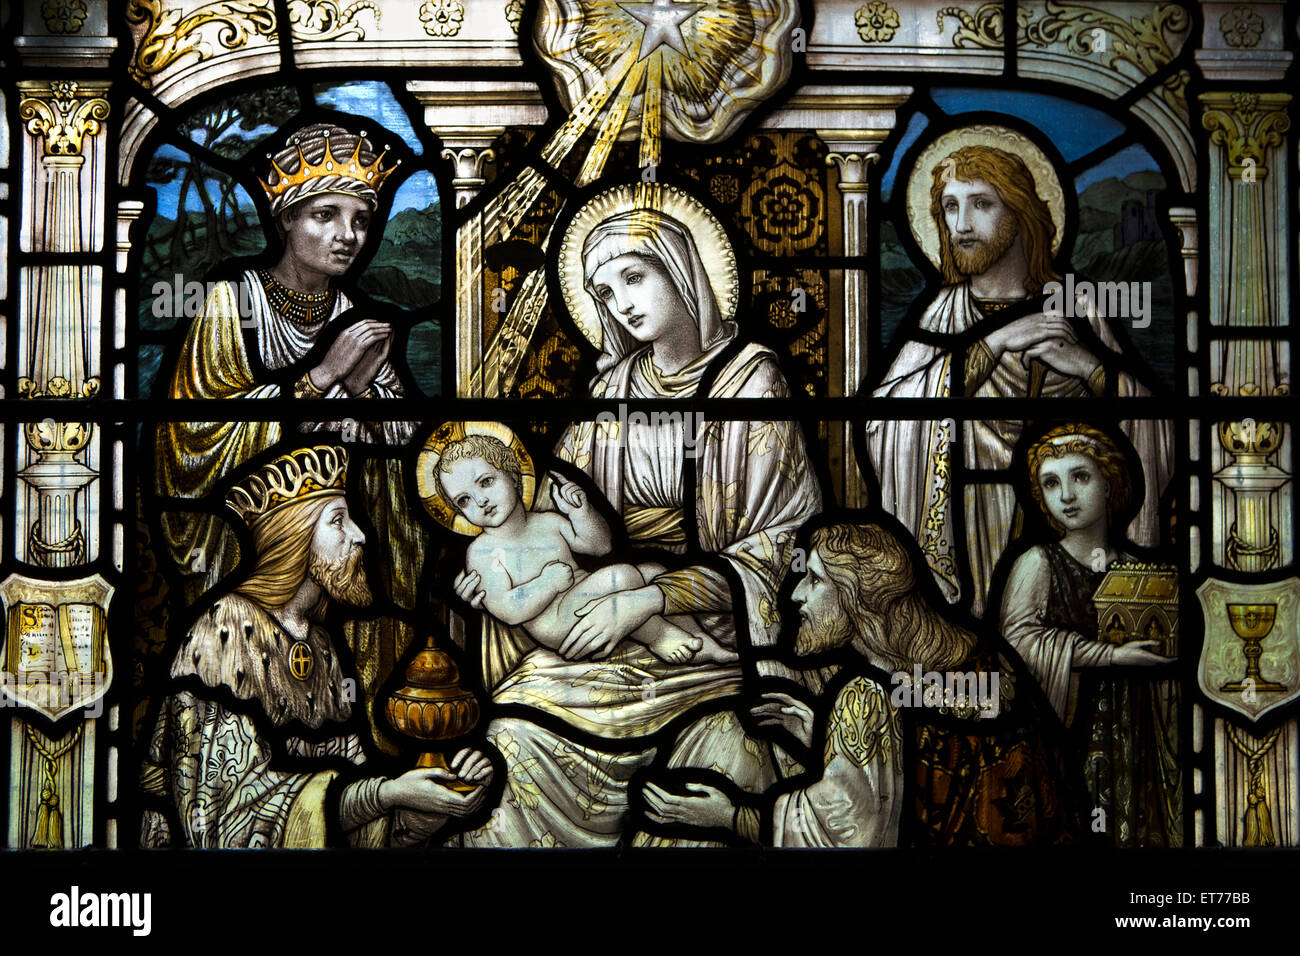 UK, England, Derbyshire, Buxton, St Anne’s Church, nativity stained glass window Stock Photo